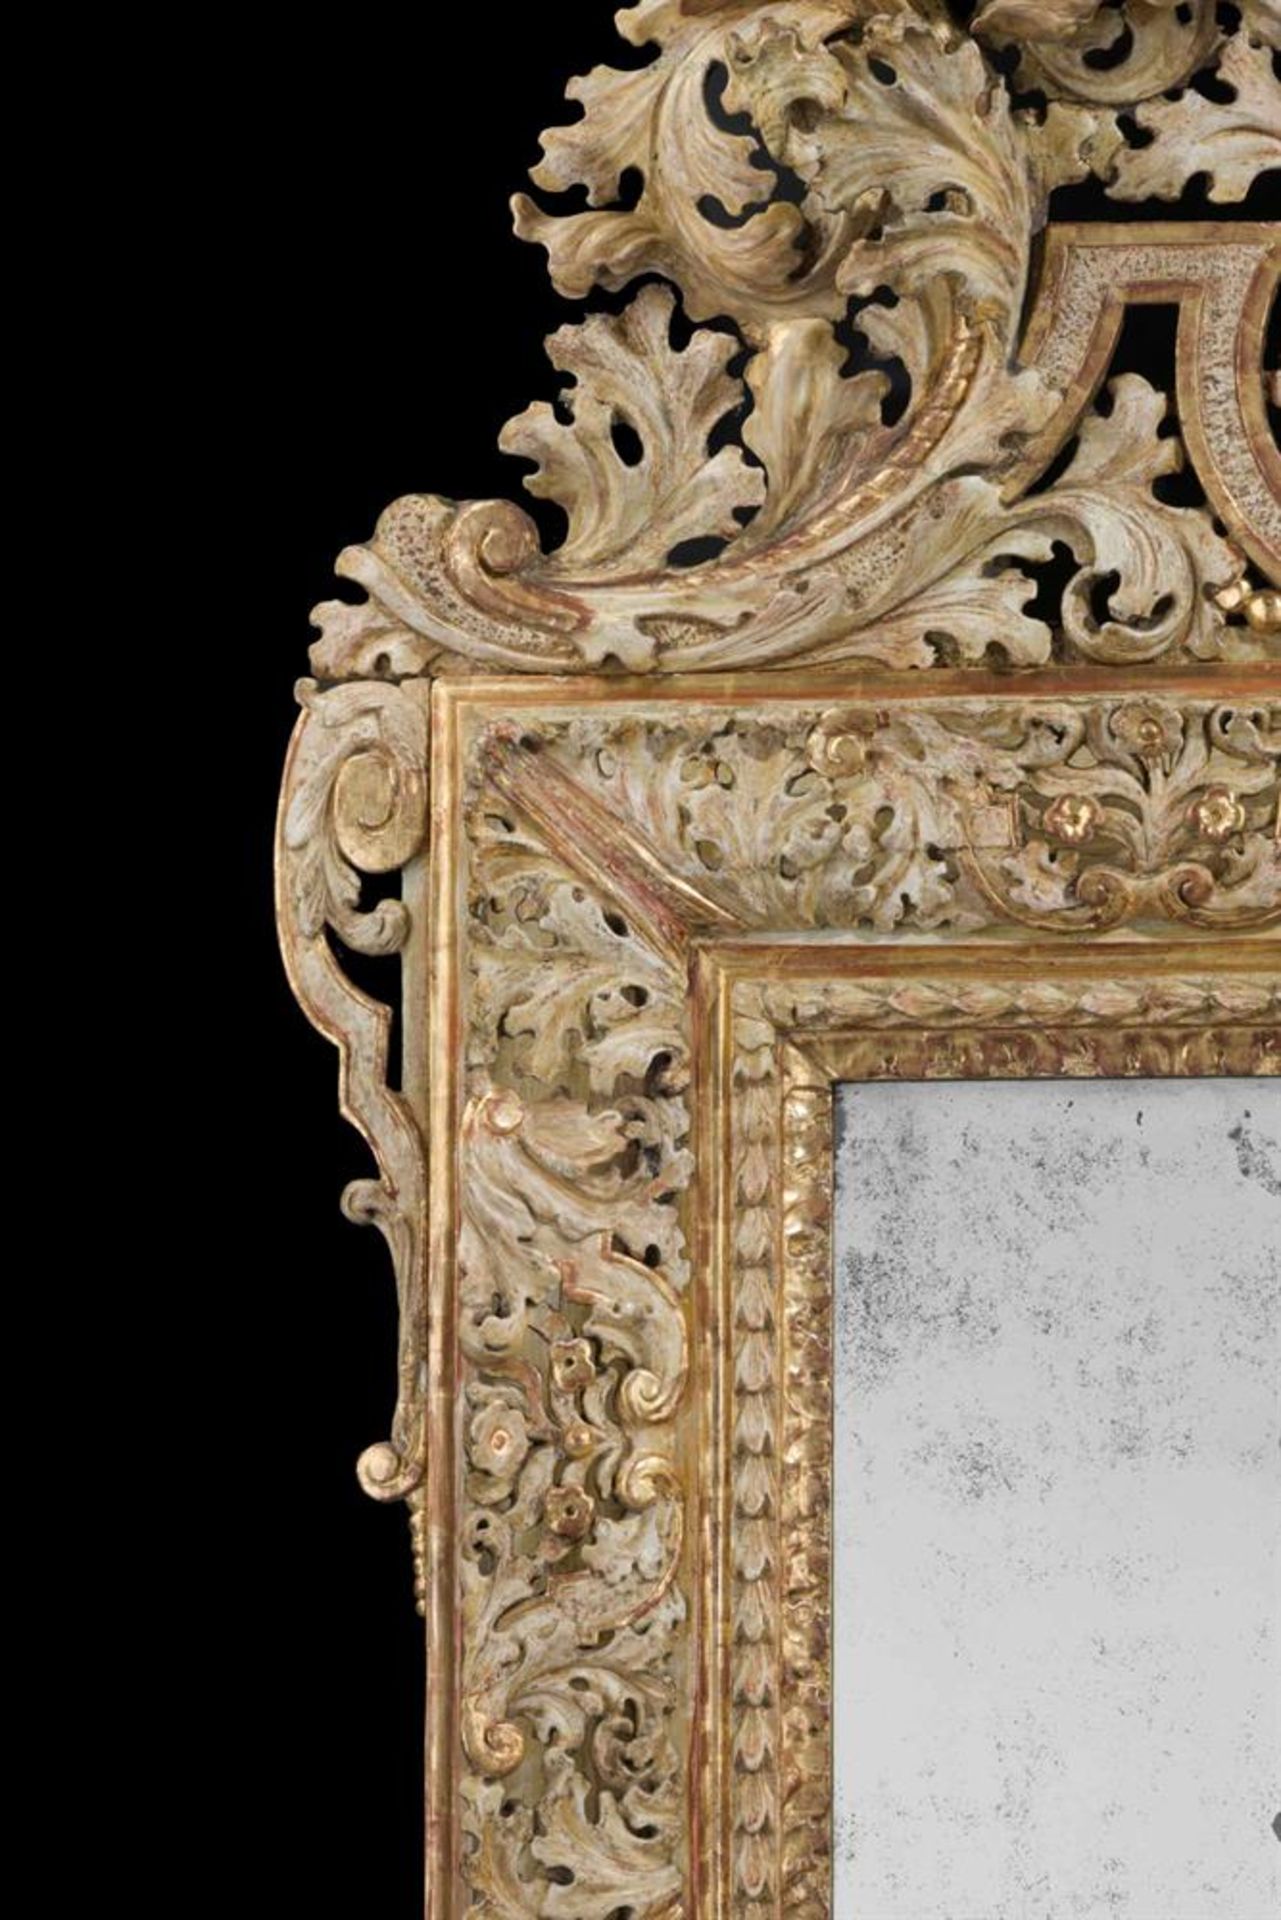 A LARGE CARVED GILTWOOD WALL MIRROR, MID 18TH CENTURY - Image 2 of 4